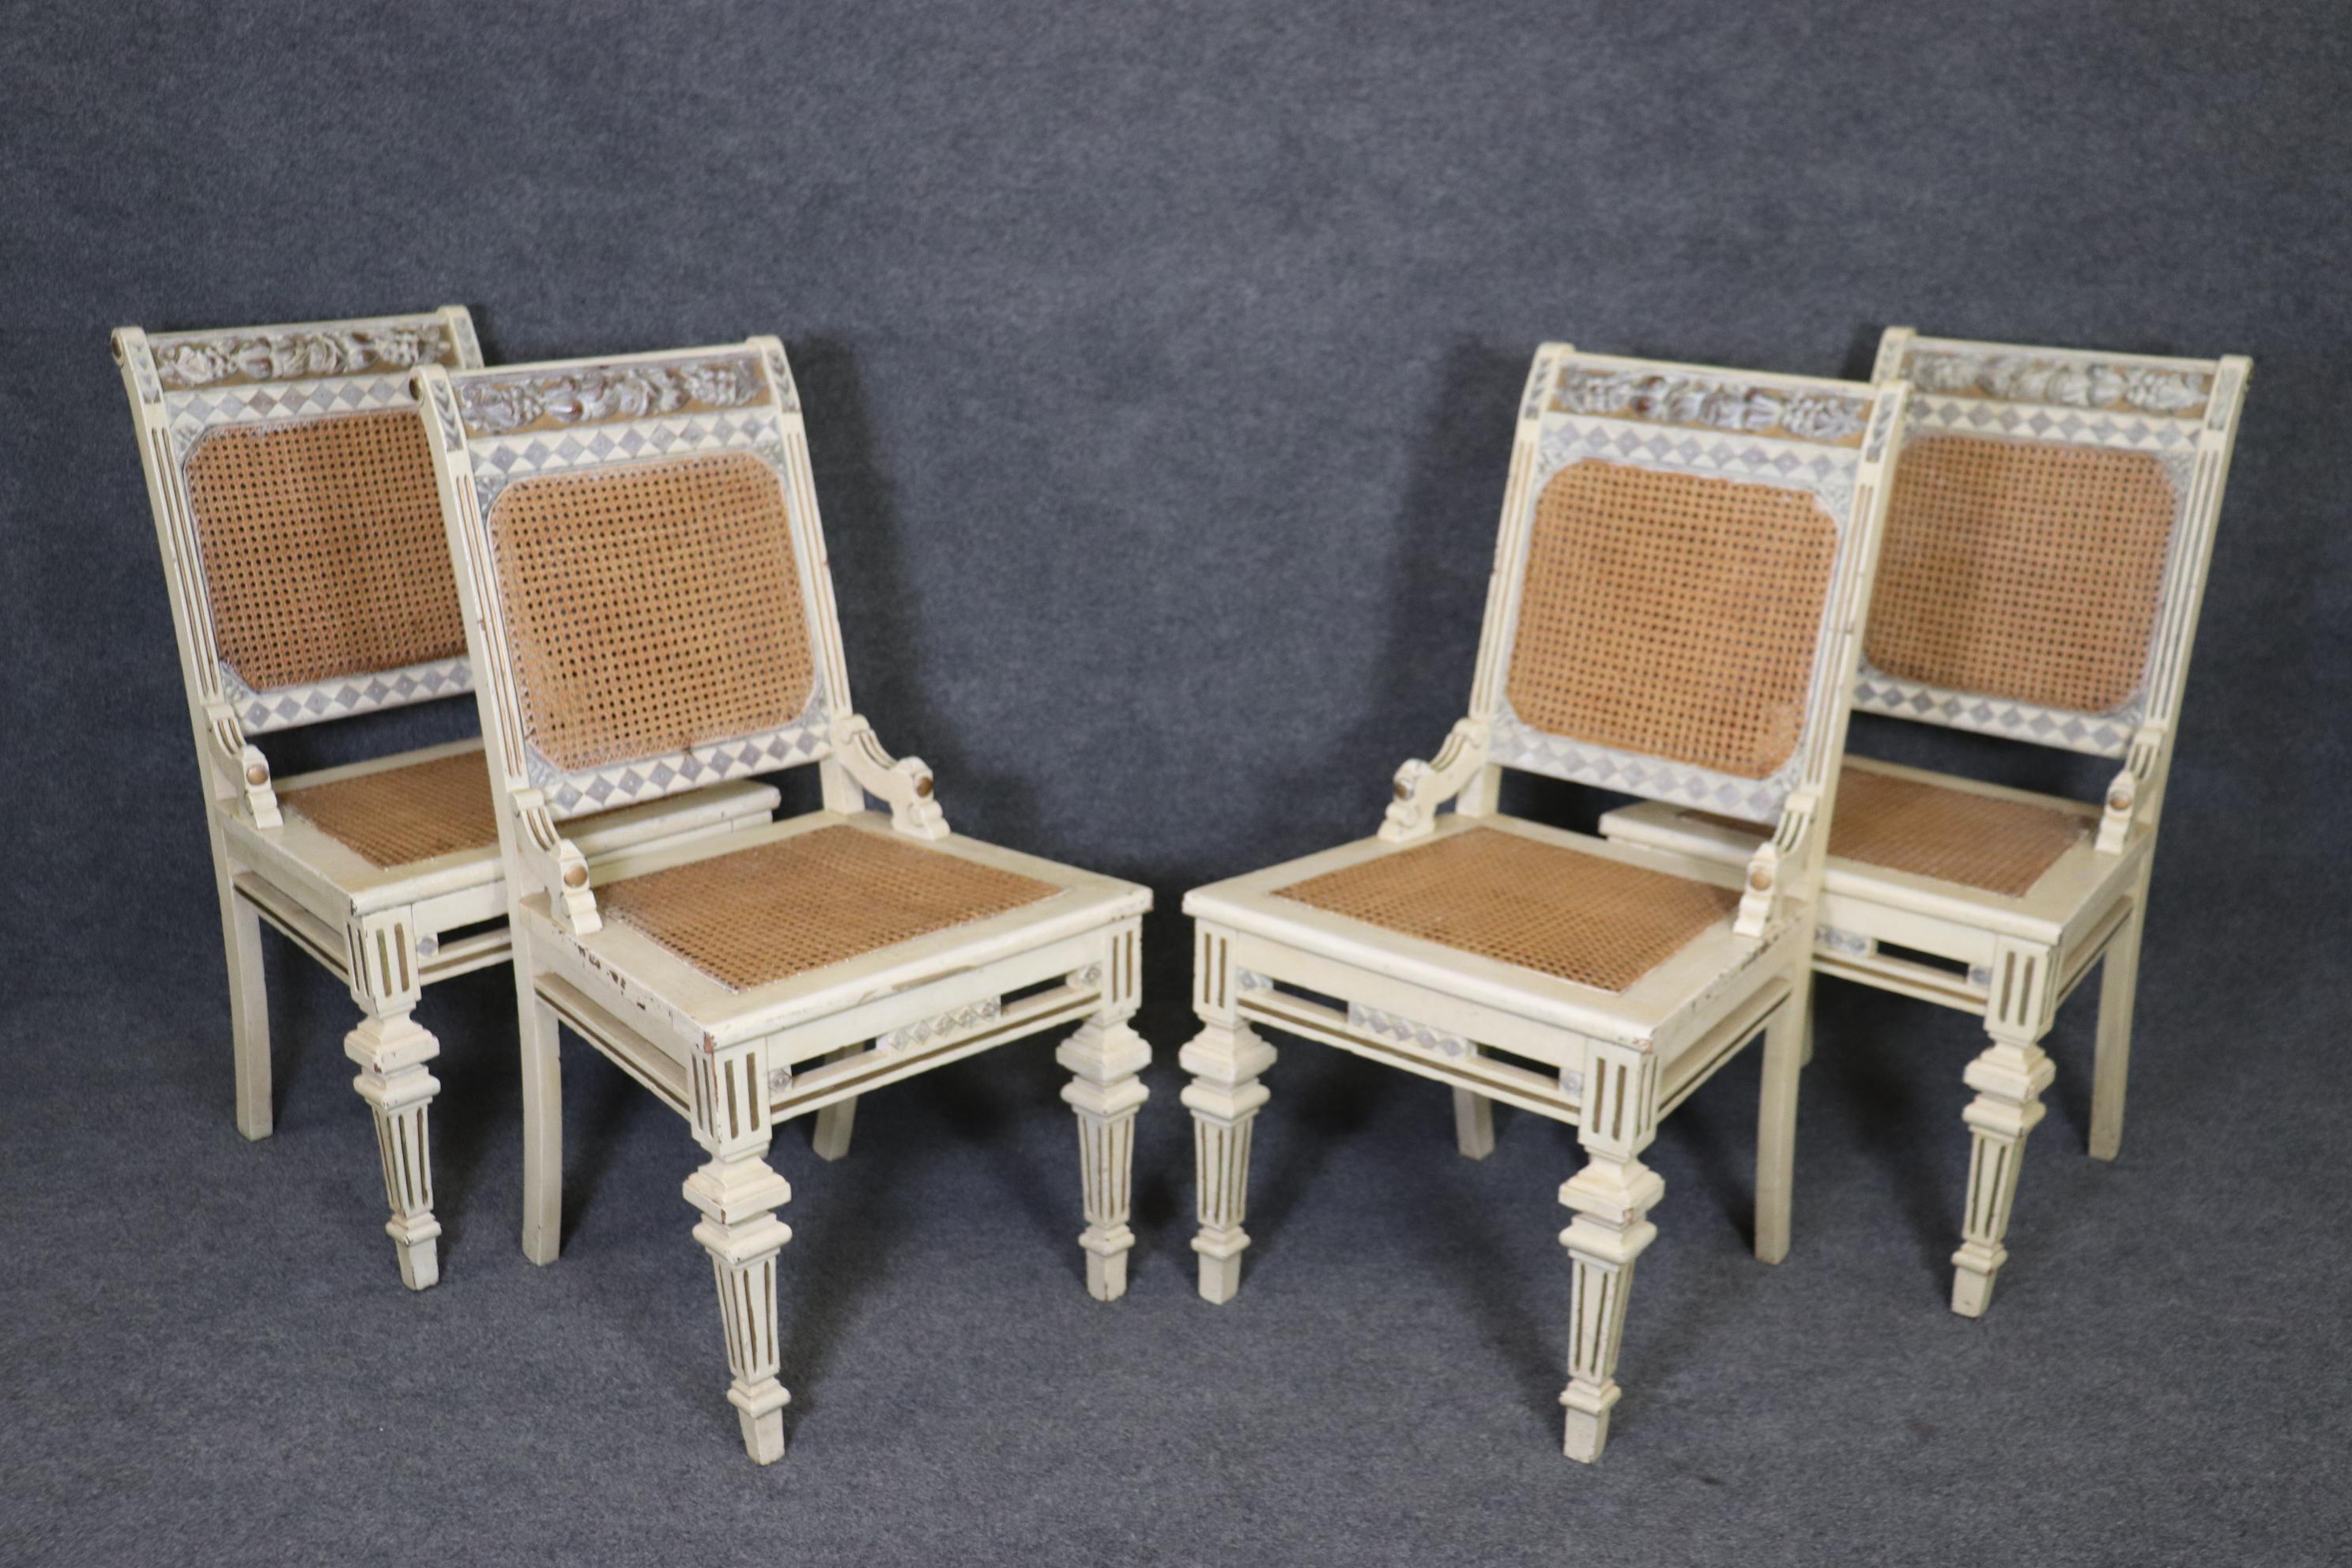 This is a beautiful set of distress painted antique white French country dining chairs with cane backs and seats. The chairs are in a distressed painted finish with minor signs of age and wear as to be expected. The chairs measure 37 tall x 20 wide